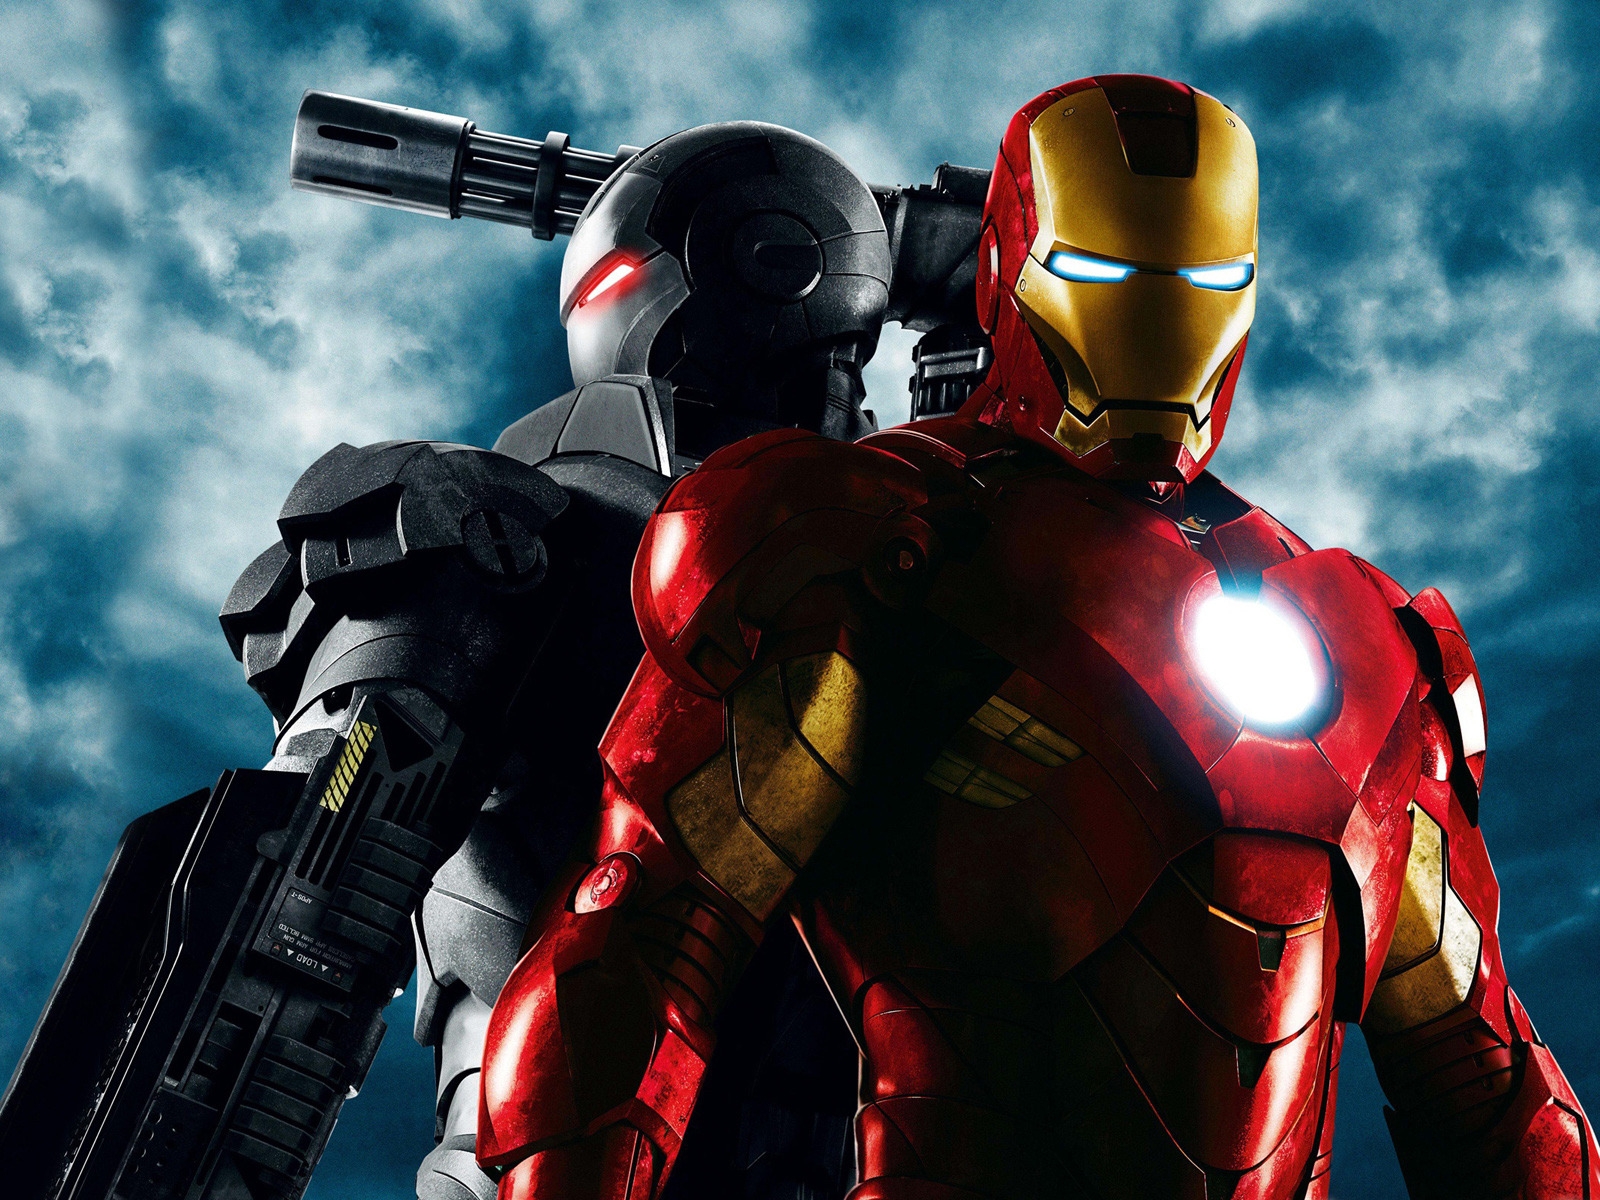 Iron Man 2 Poster for 1600 x 1200 resolution